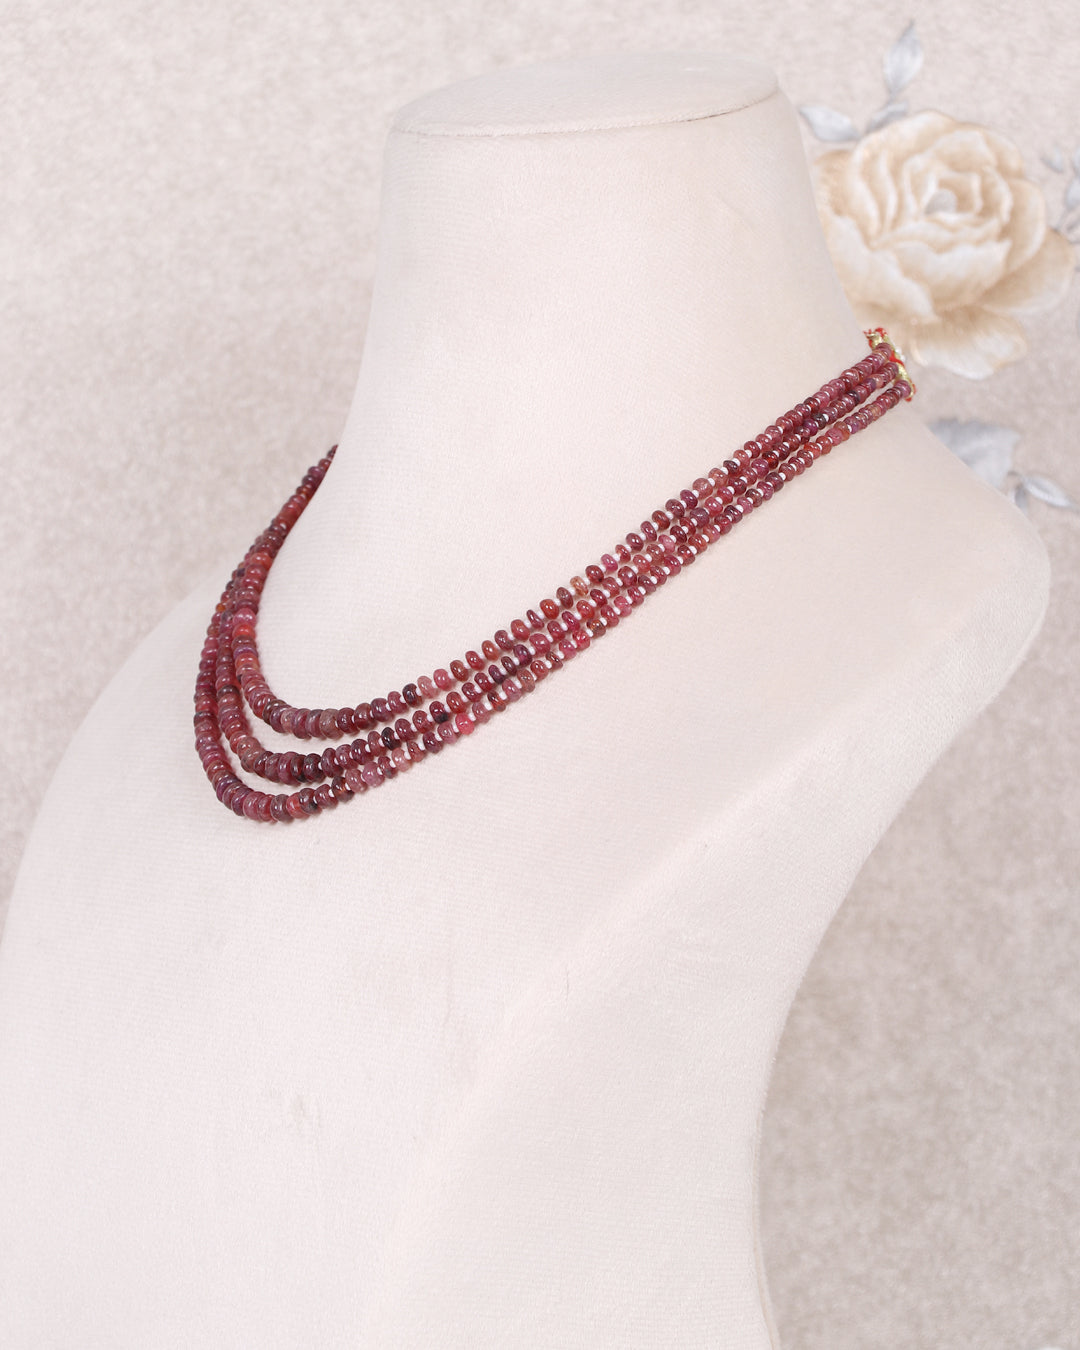 Natural Ruby & Pearl  Gemstone Beads Necklace Jewelry